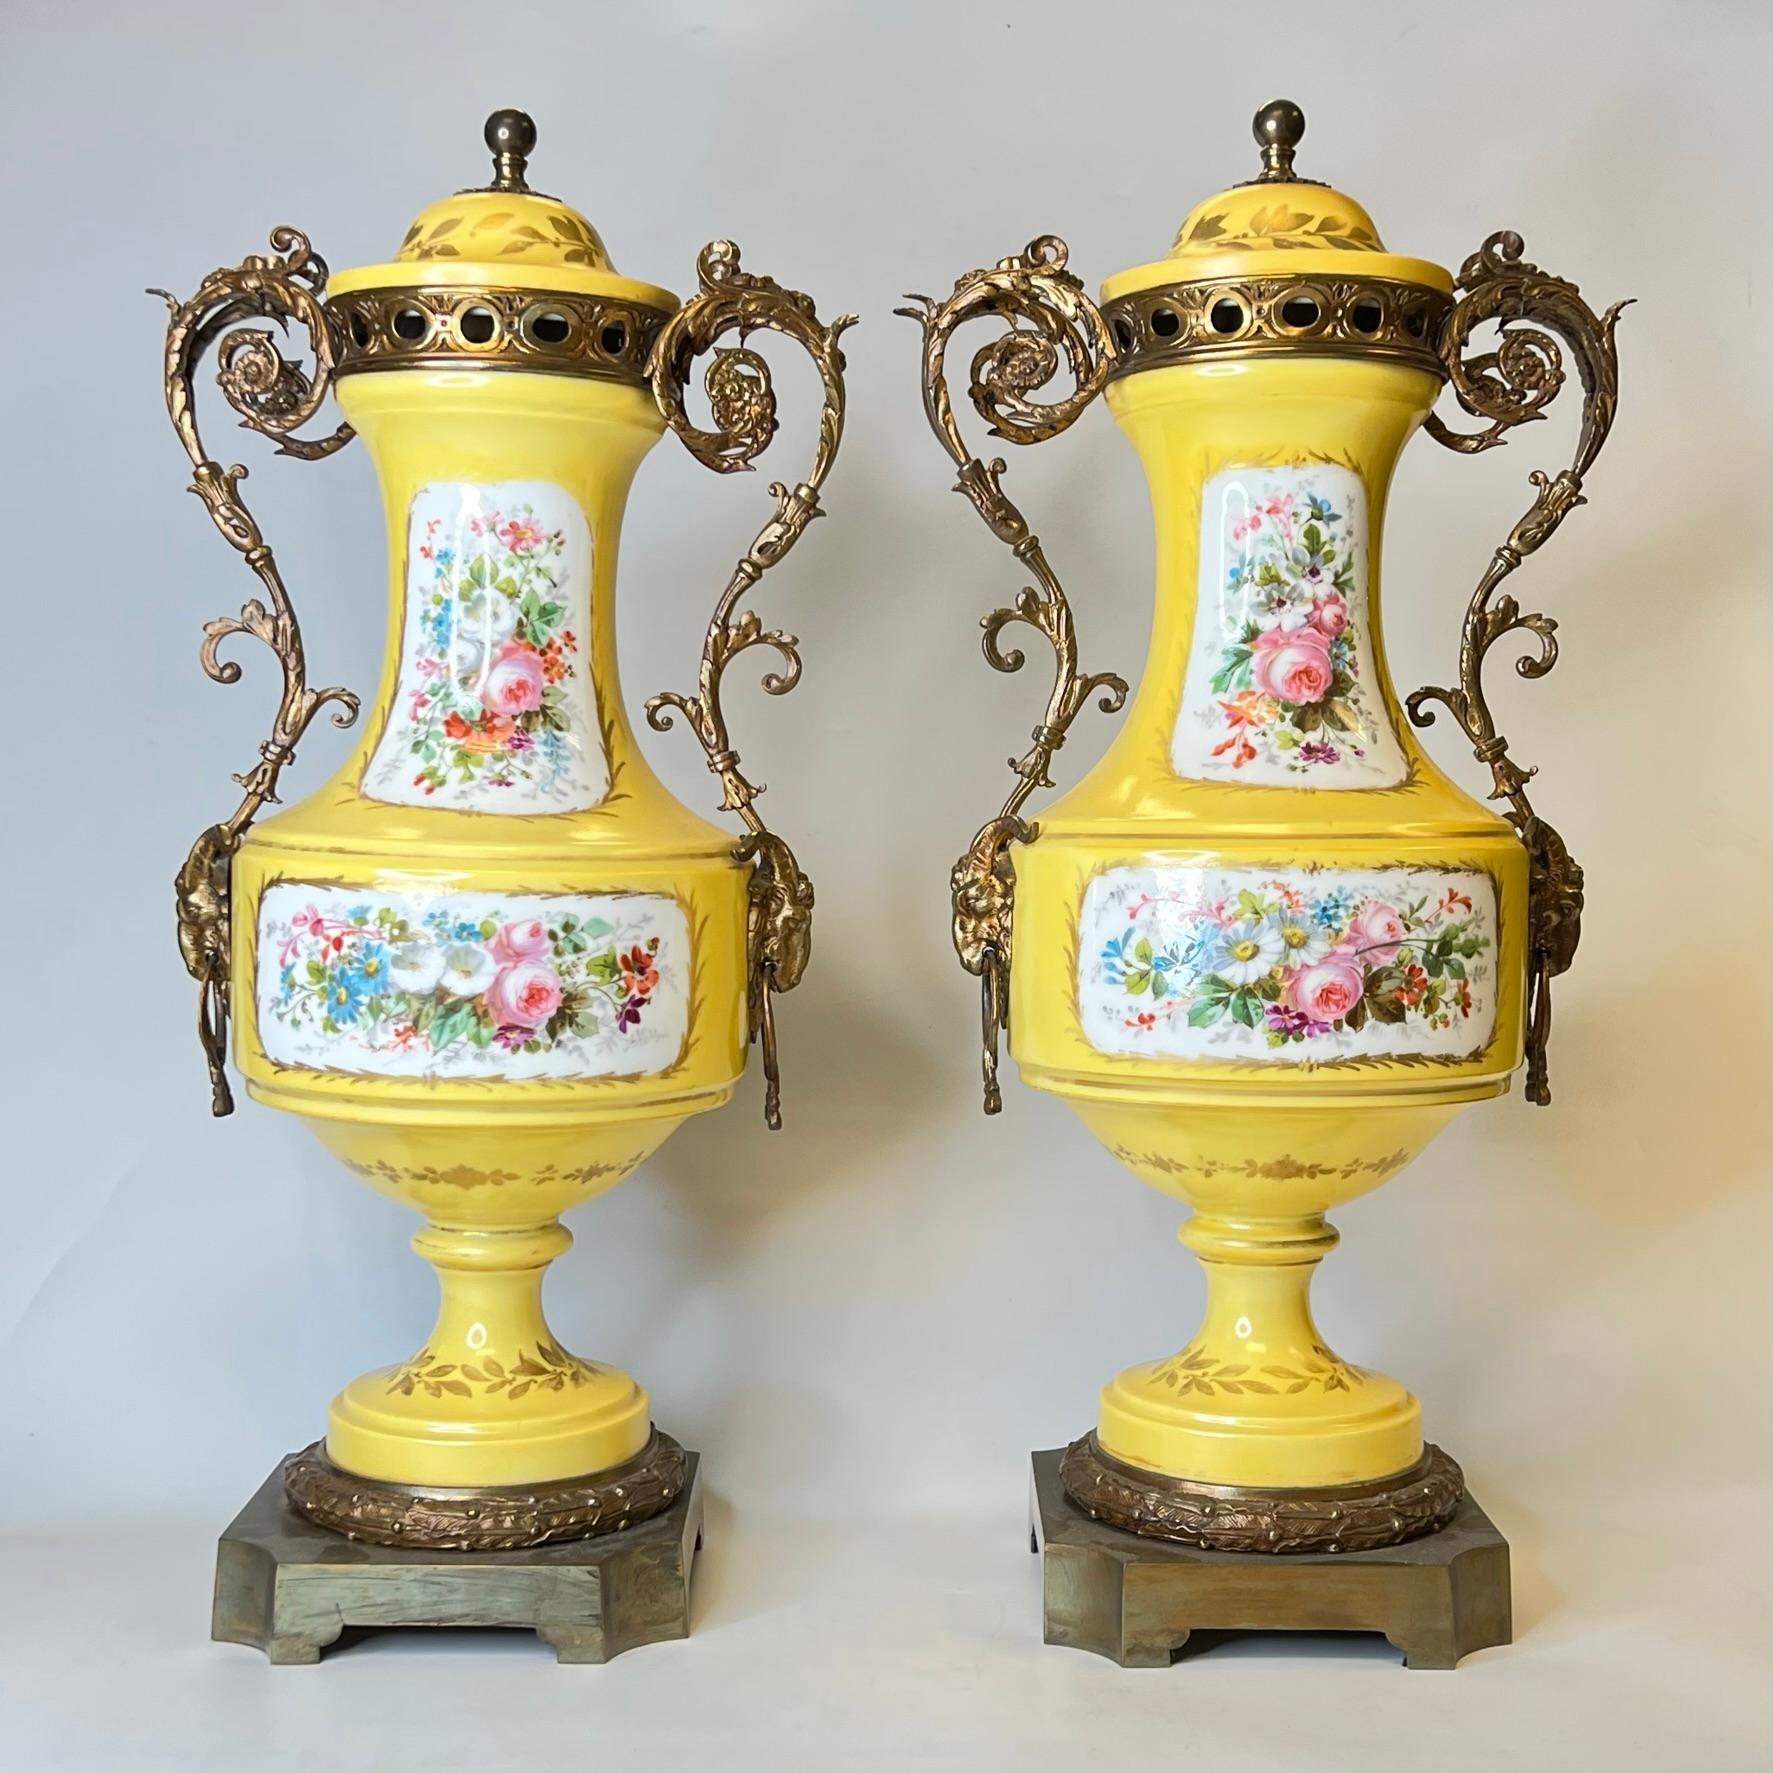 Pair French 19th century bronze-mounted Sevres style porcelain urns in the Louis XV/XVI style with finely painted cartouches depicting courting lovers and floral bouquets.
